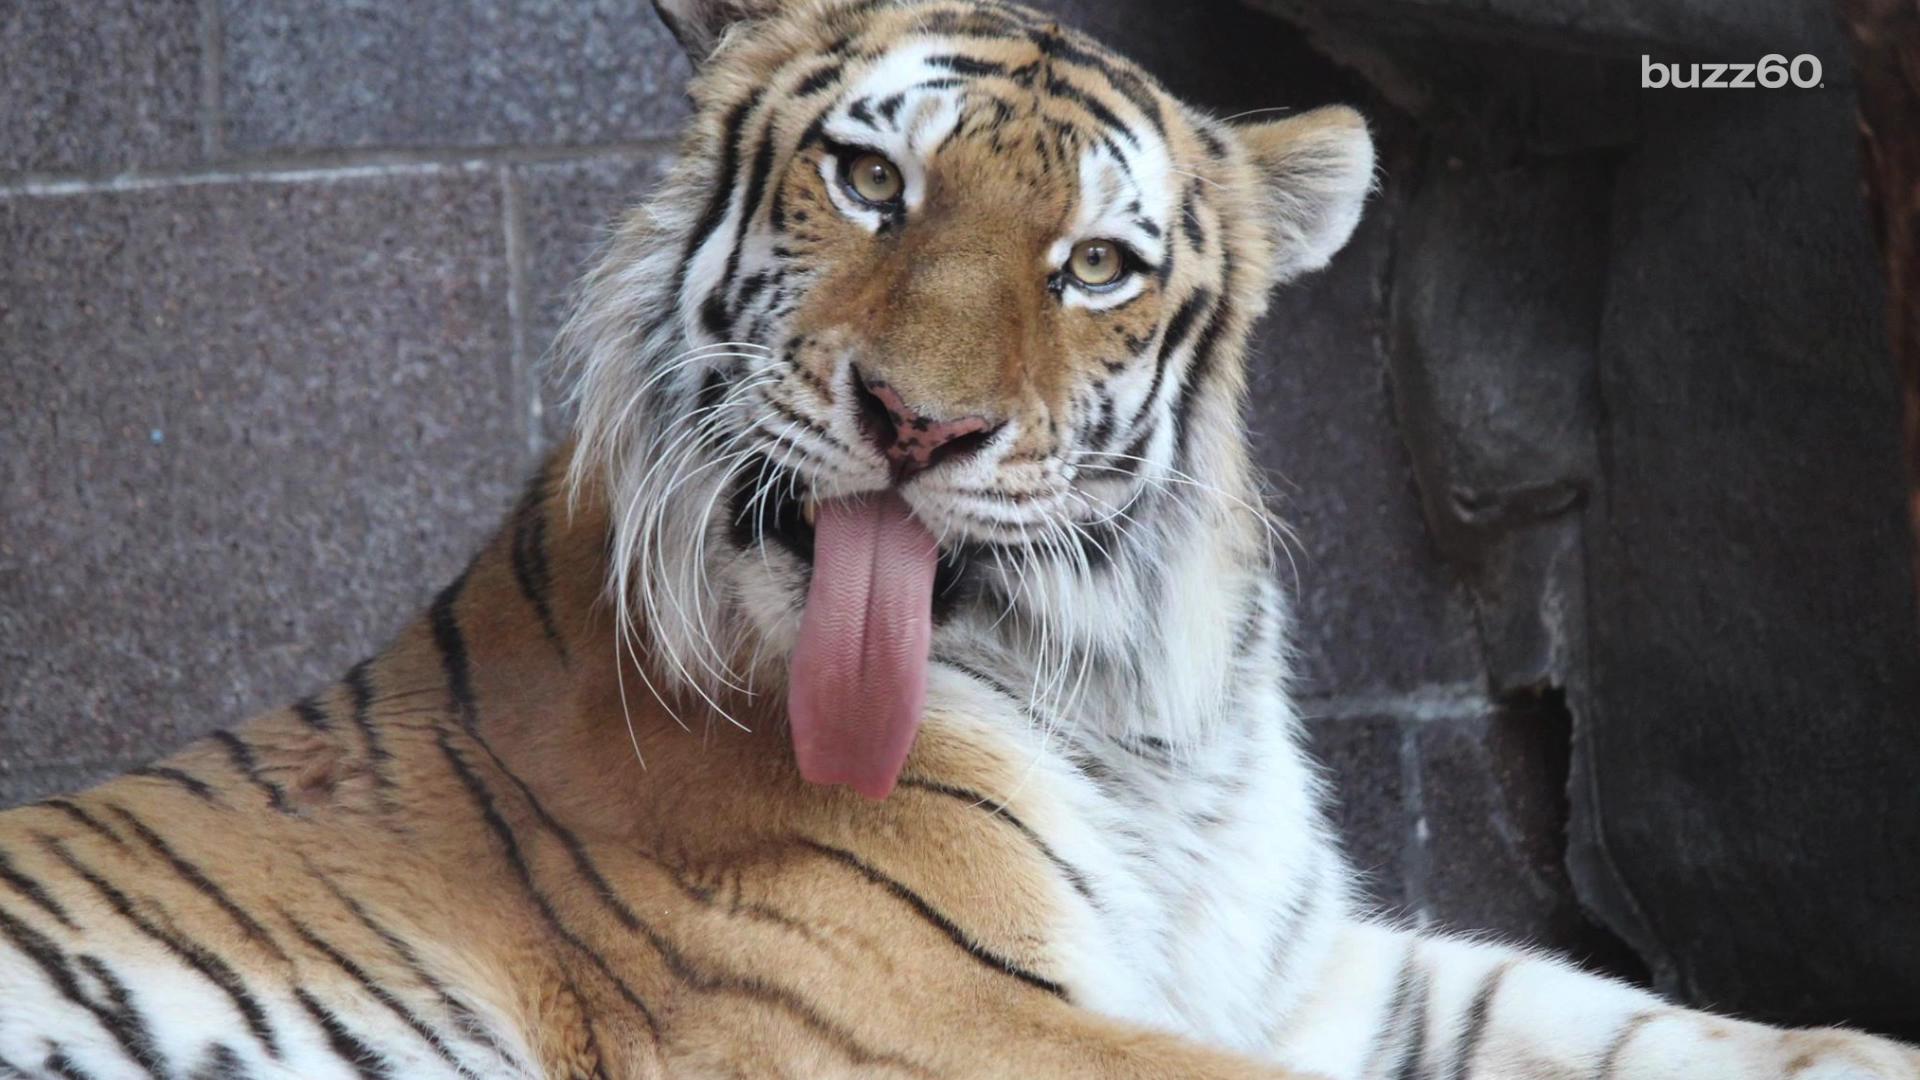 Drunk woman bitten by a tiger after sneaking into zoo